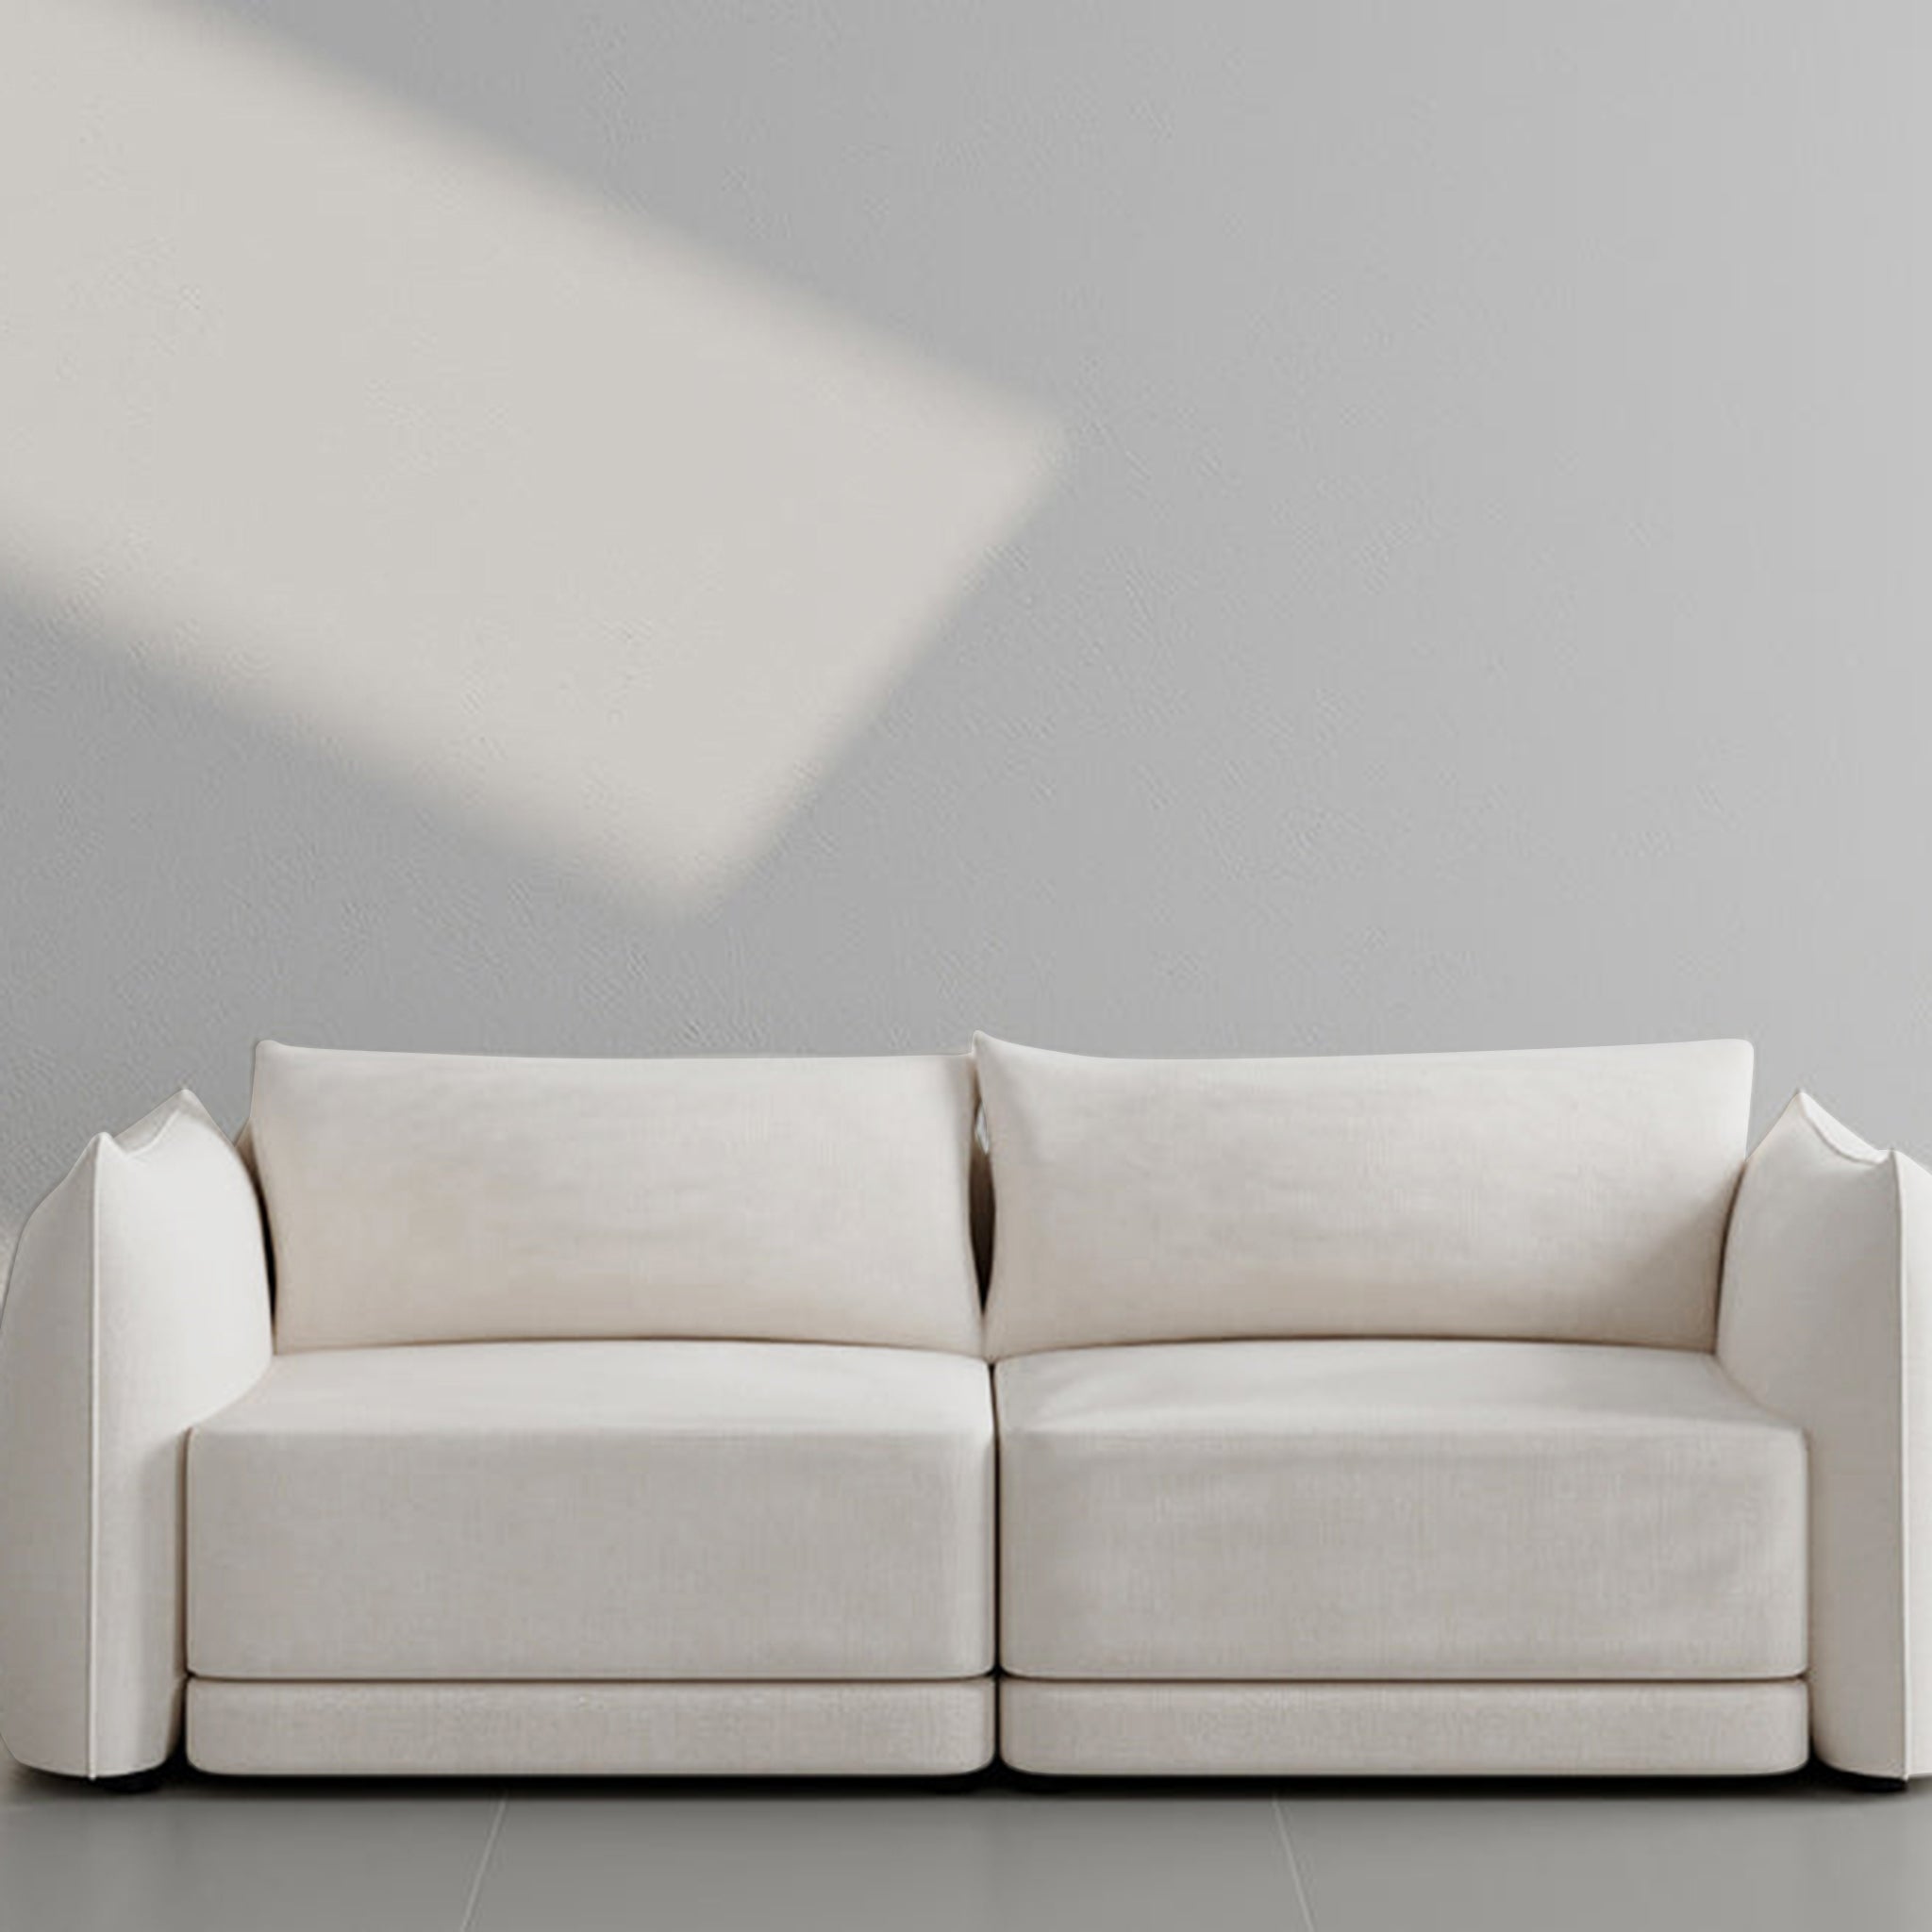 Modern two-seater white sofa with plush cushions and a sleek design, ideal for contemporary living spaces.